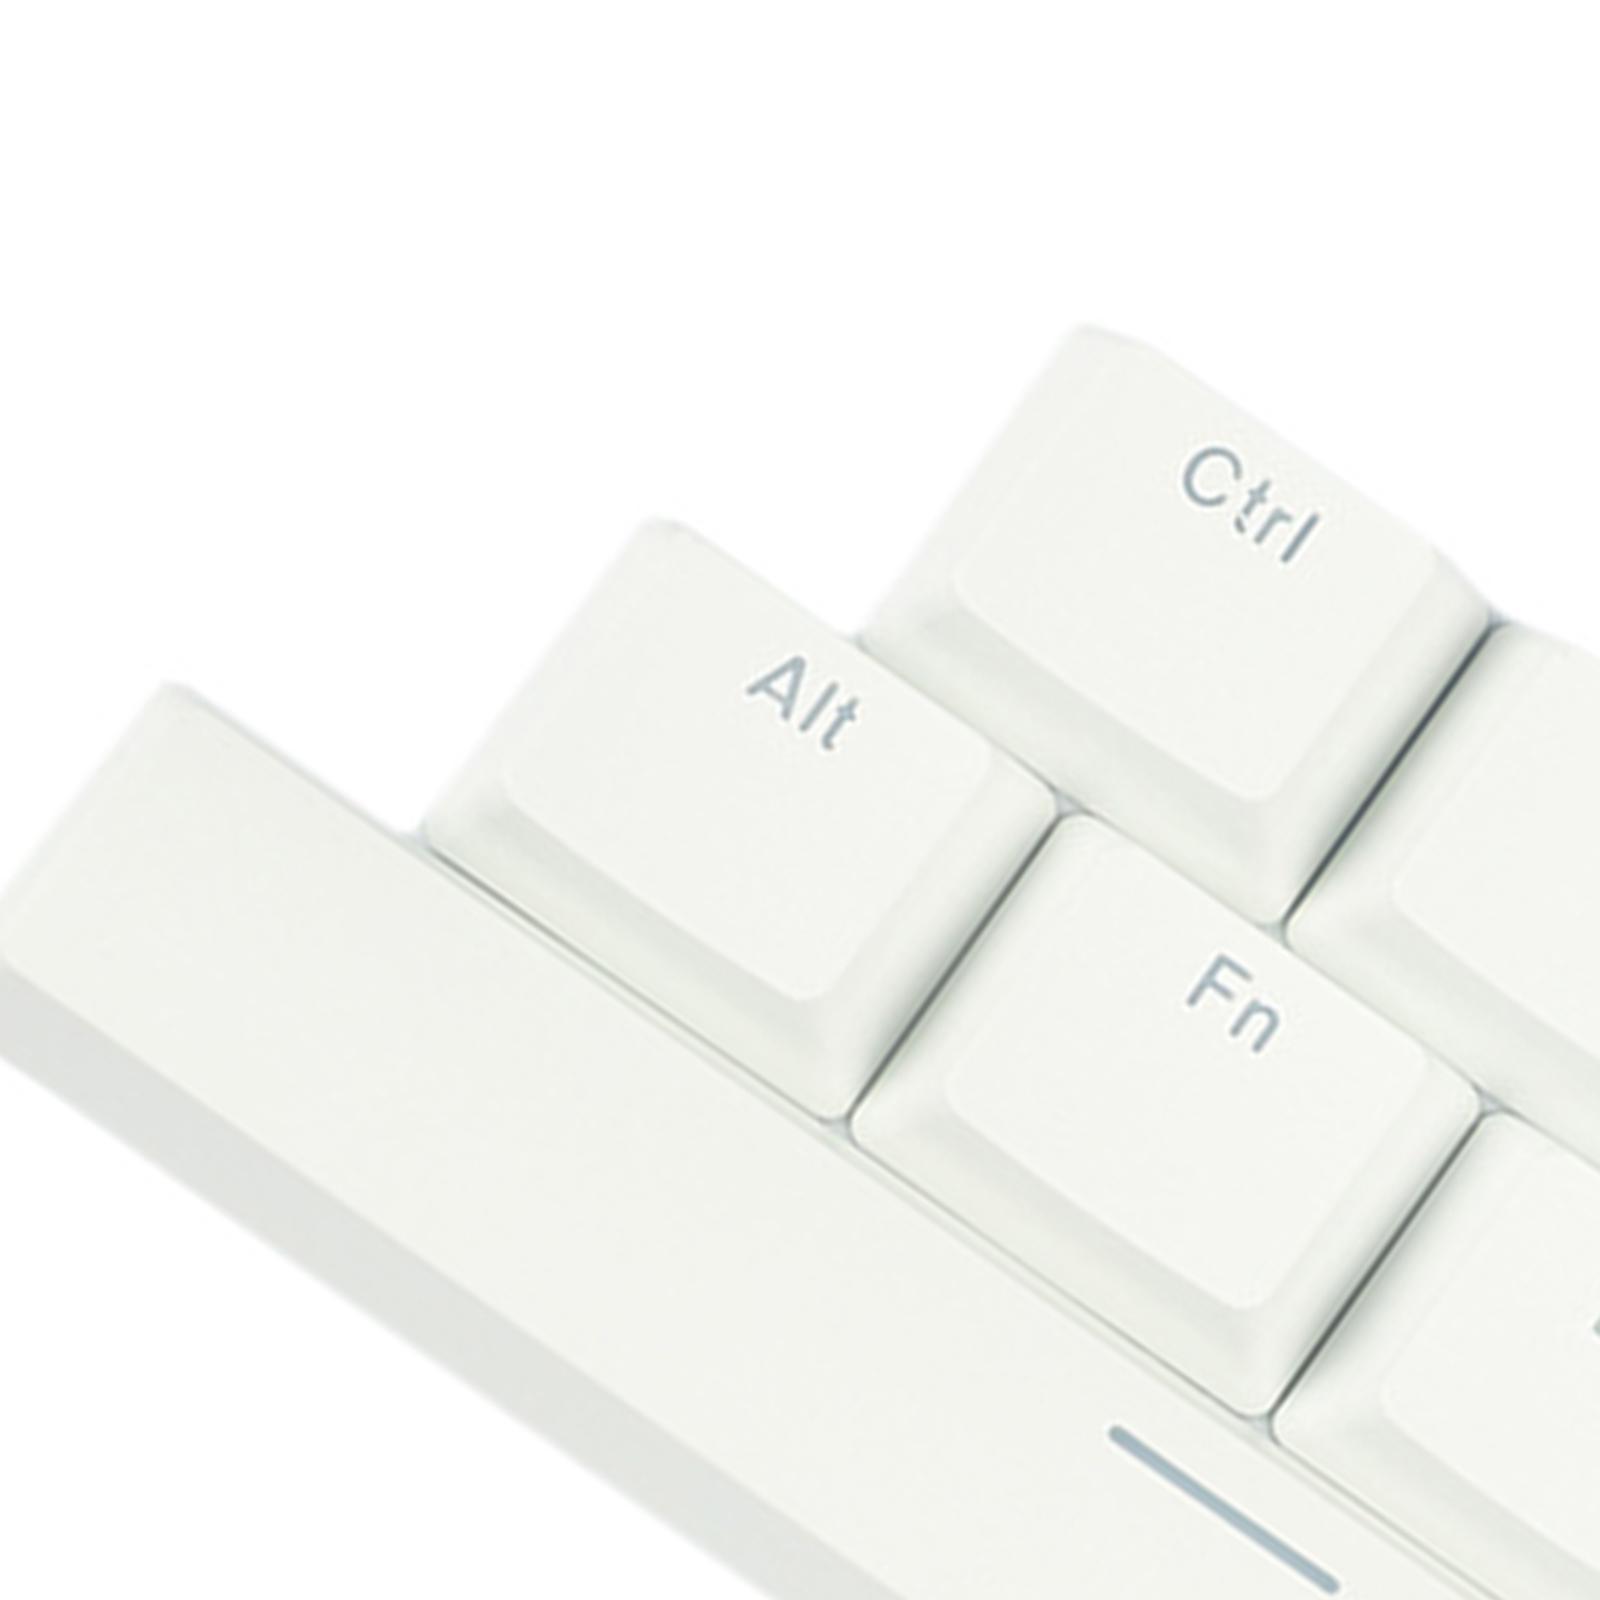 8 Pieces PBT Two-Color Translucent Keycaps for Mechanical Keyboard